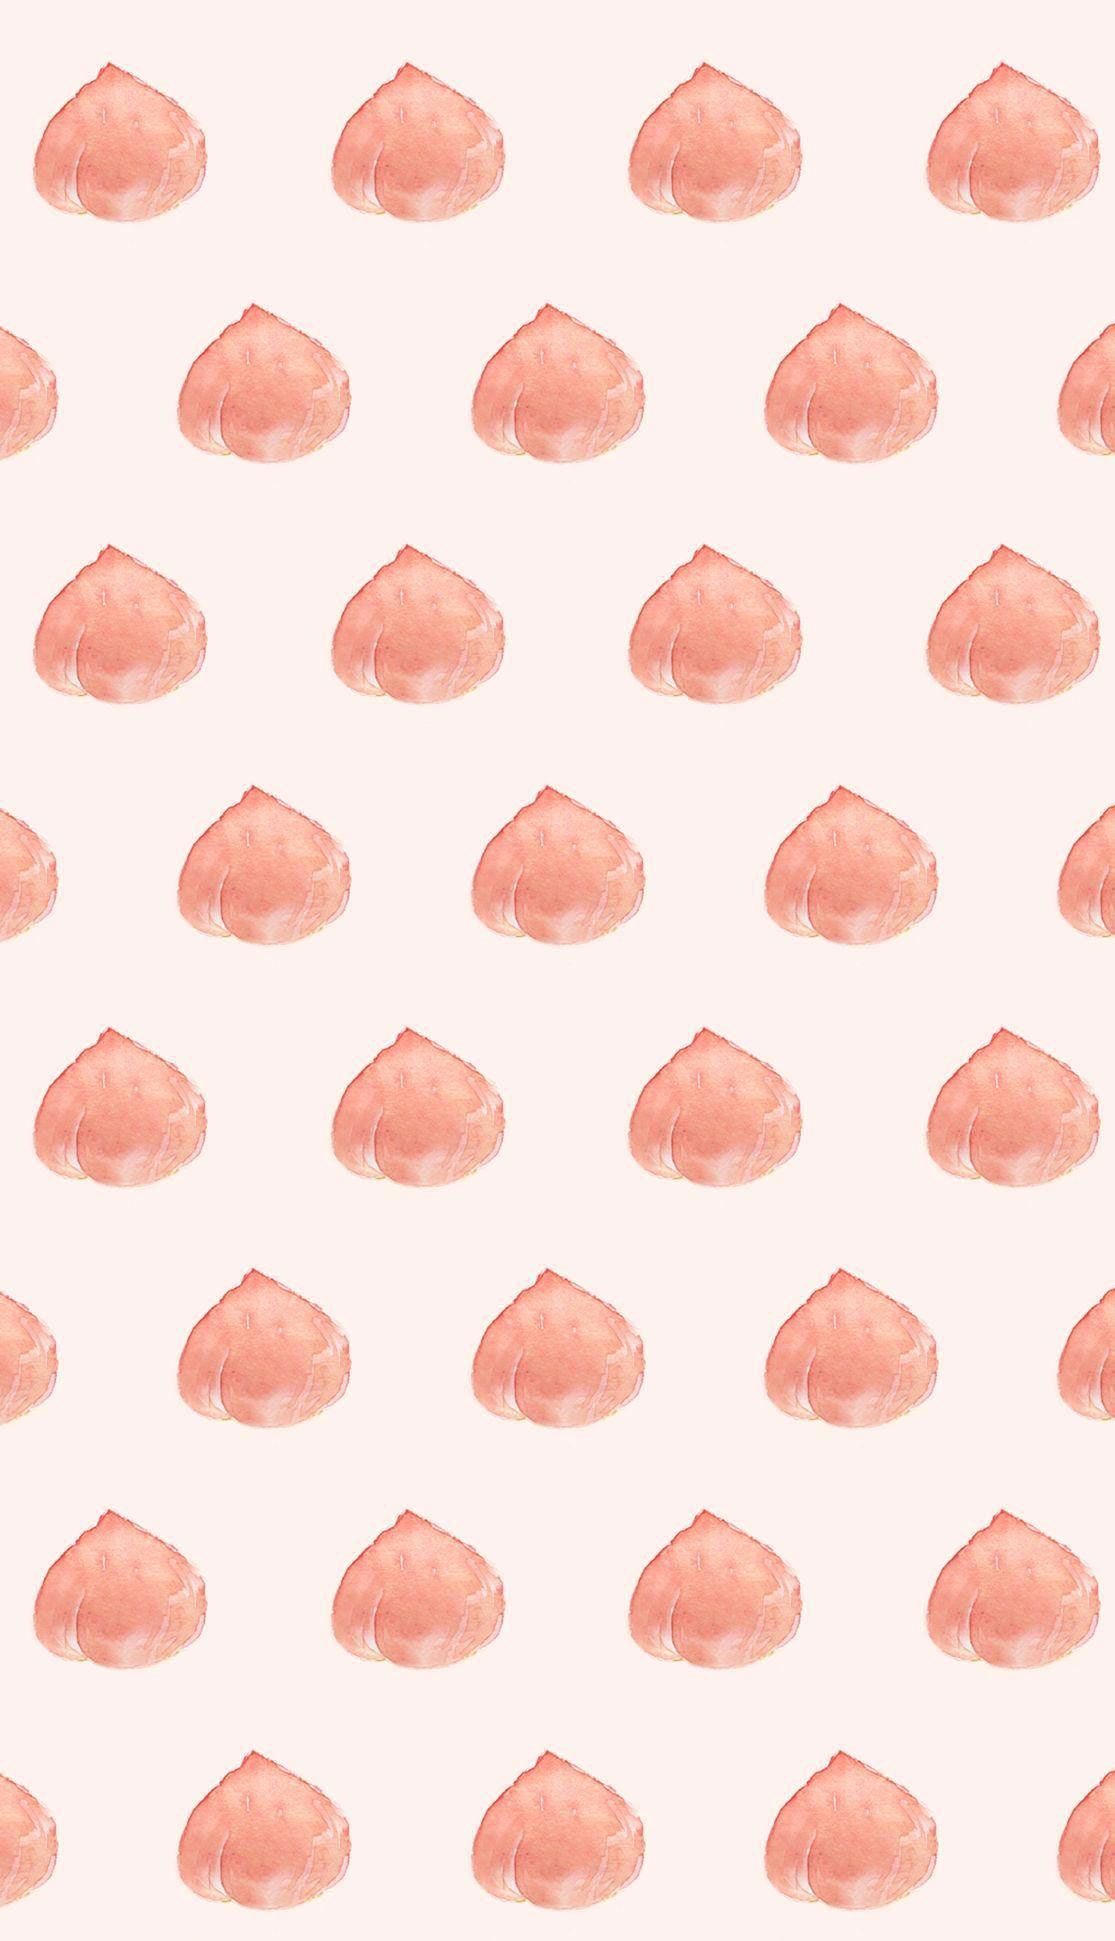 IPhone wallpaper, watercolor, peach, pattern, background, cute, girly, phone, tech, aesthetic - Peach, March